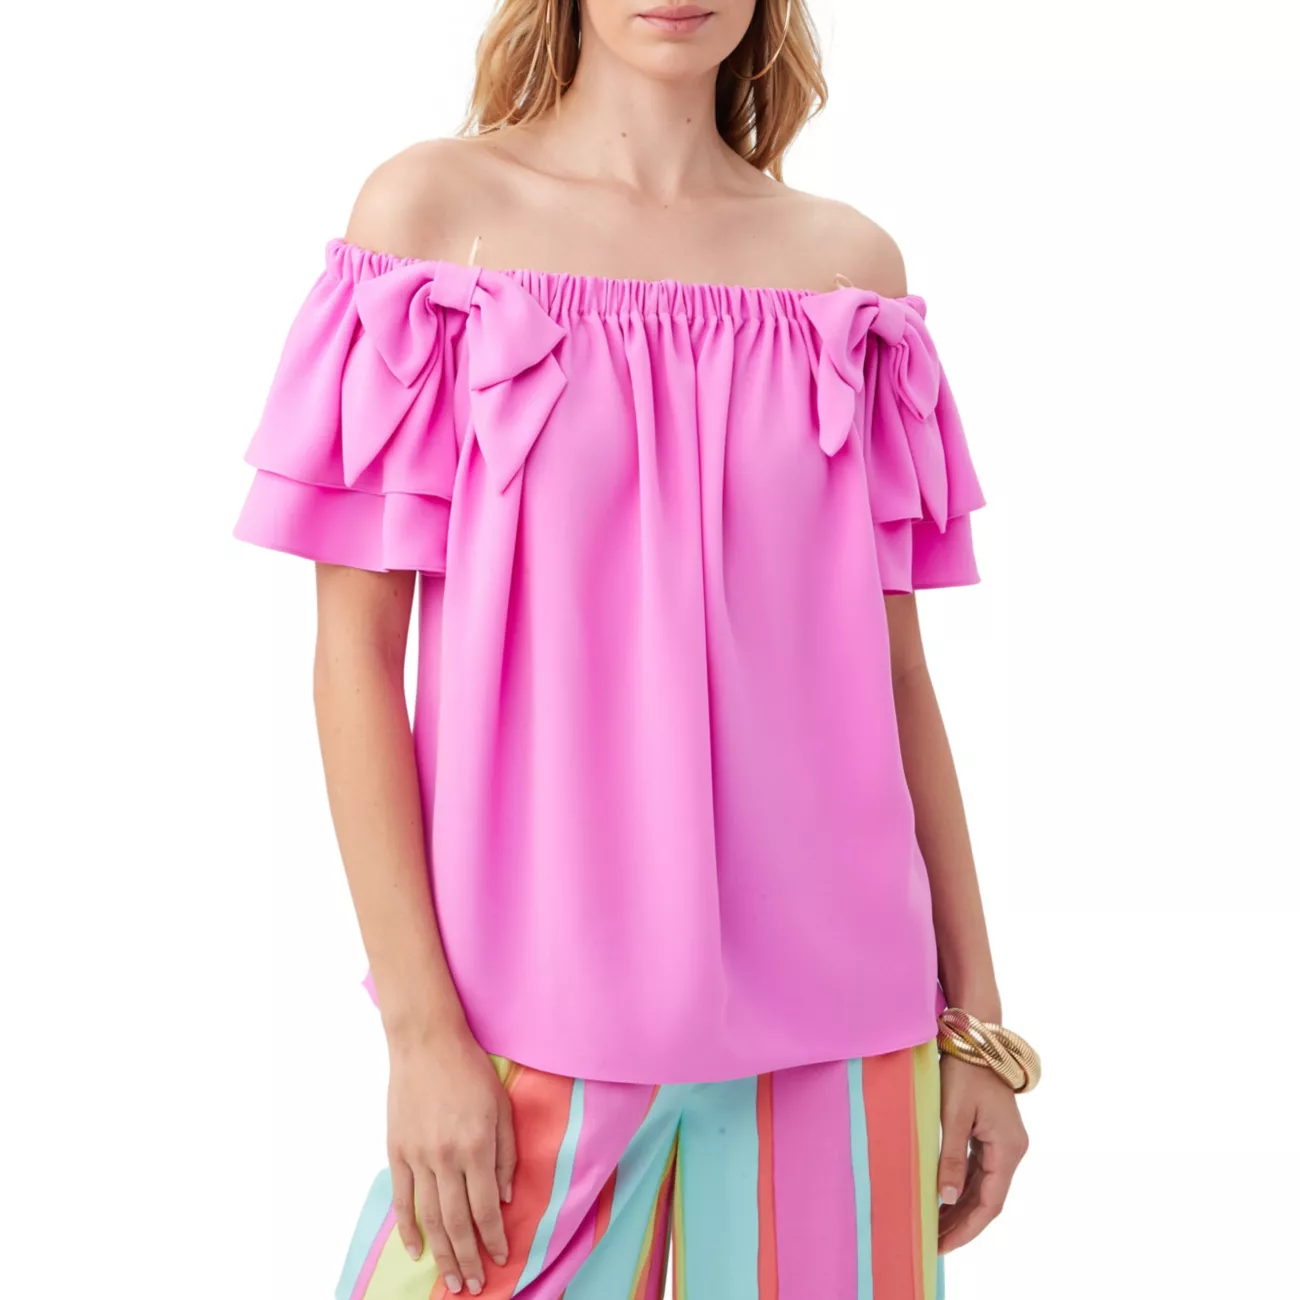 Silia Bow Off-the-Shoulder Top Trina Turk